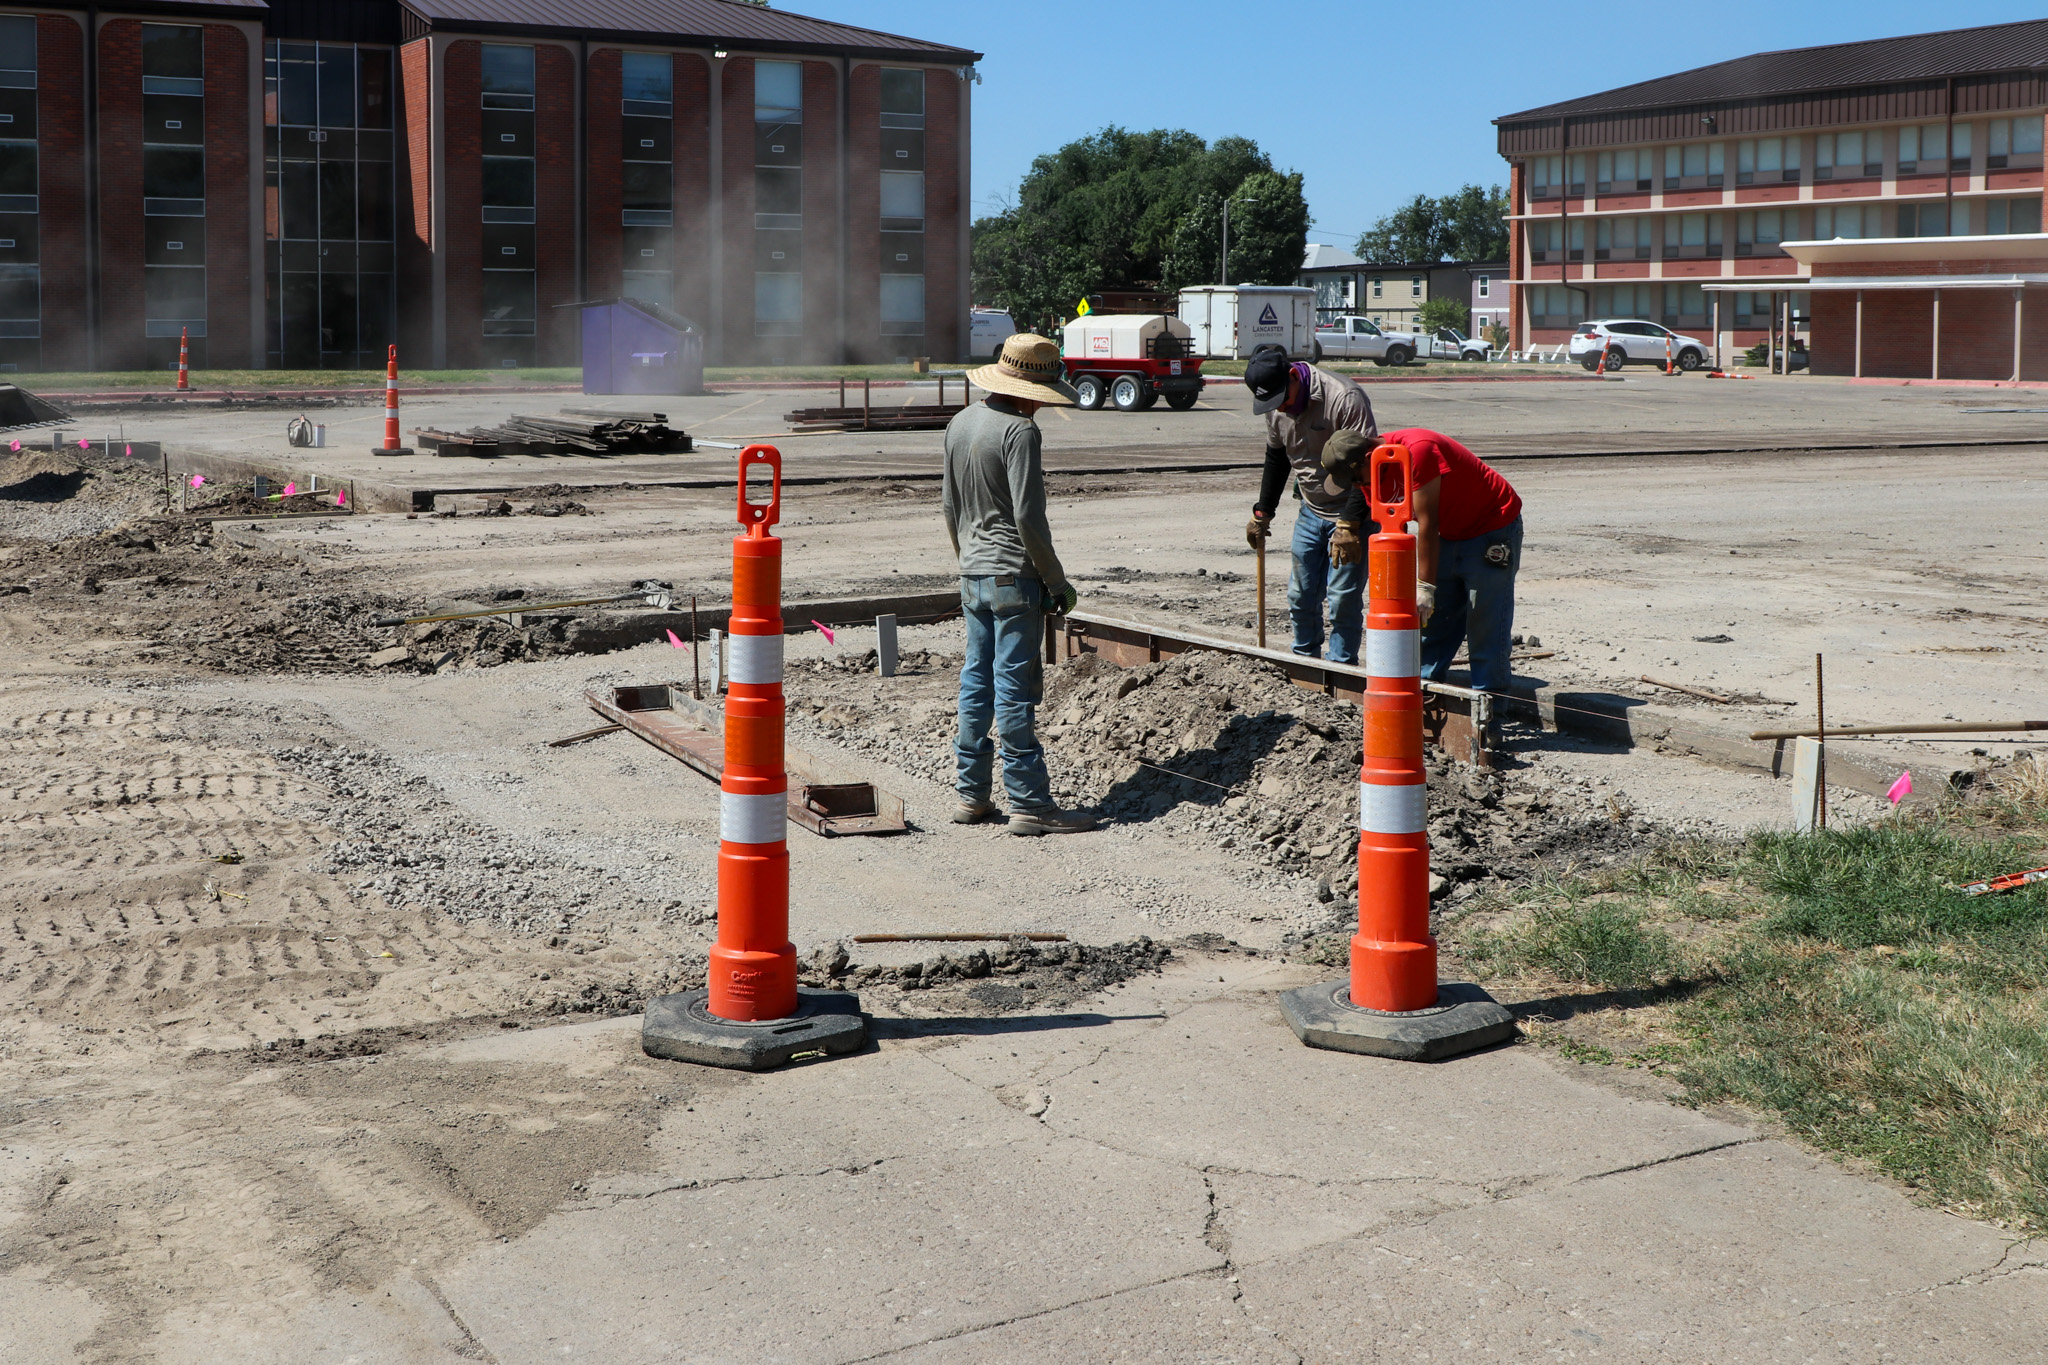 Men working outside, smoothing dirt near caution cones